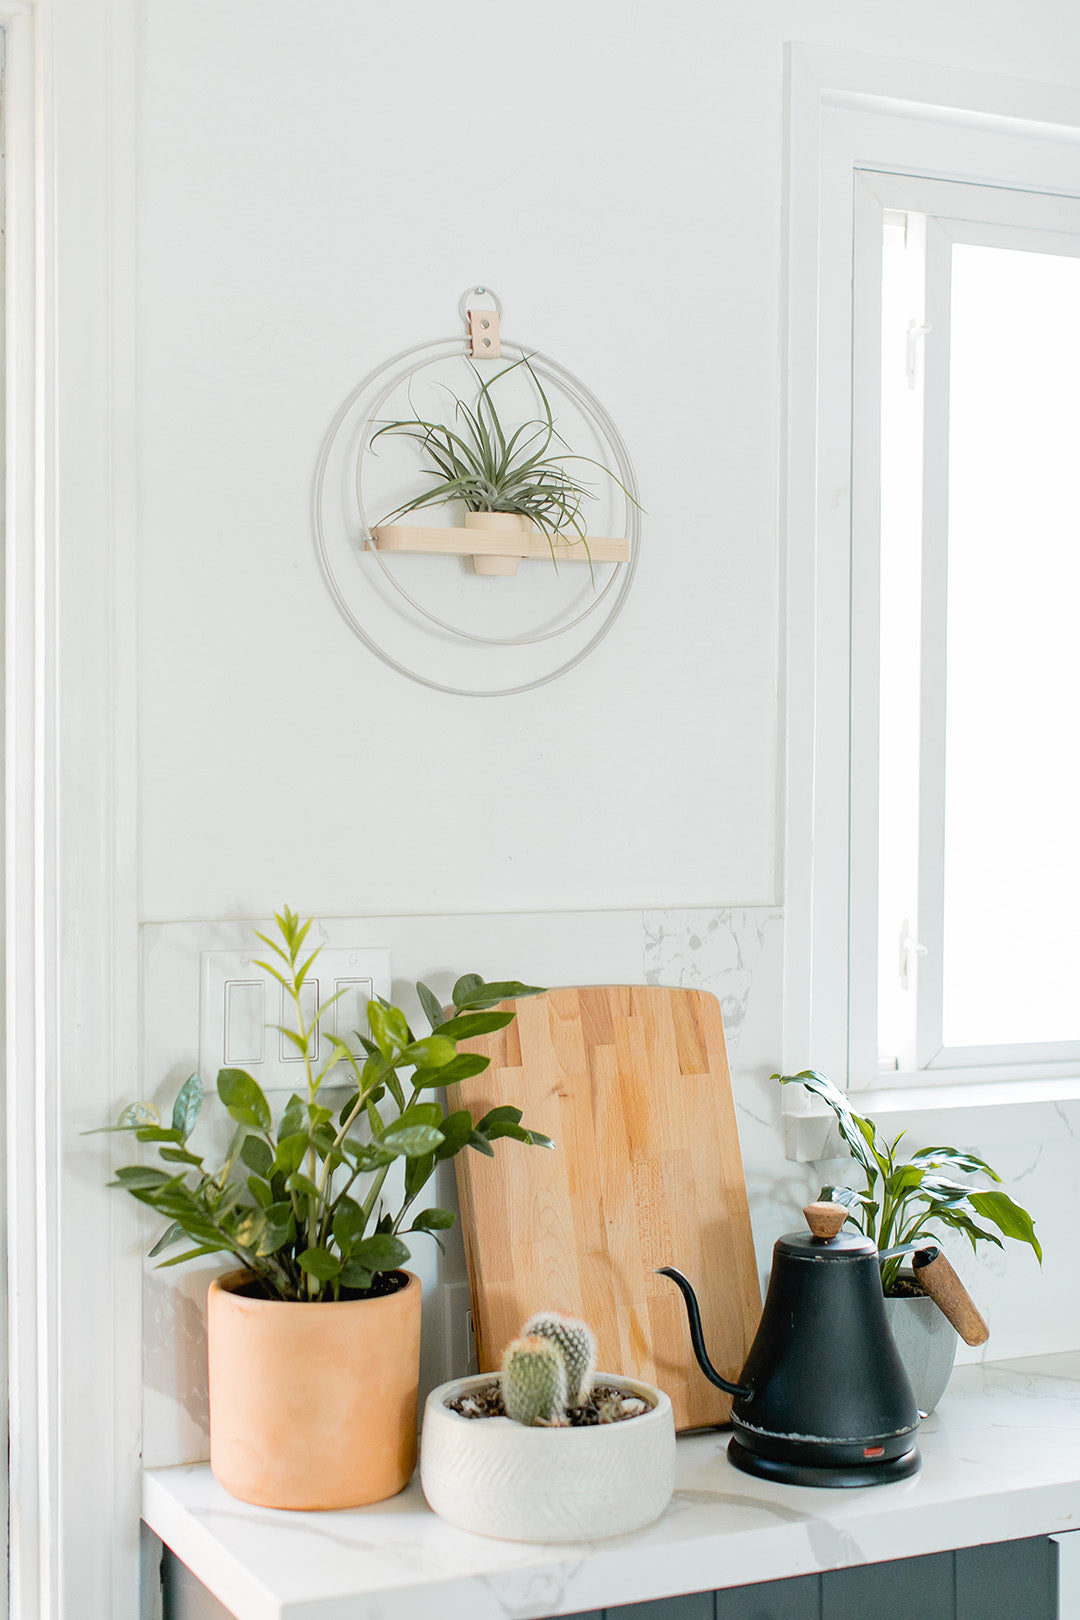 braid and wood plant shelf styled on wall above cutting board and electric kettle